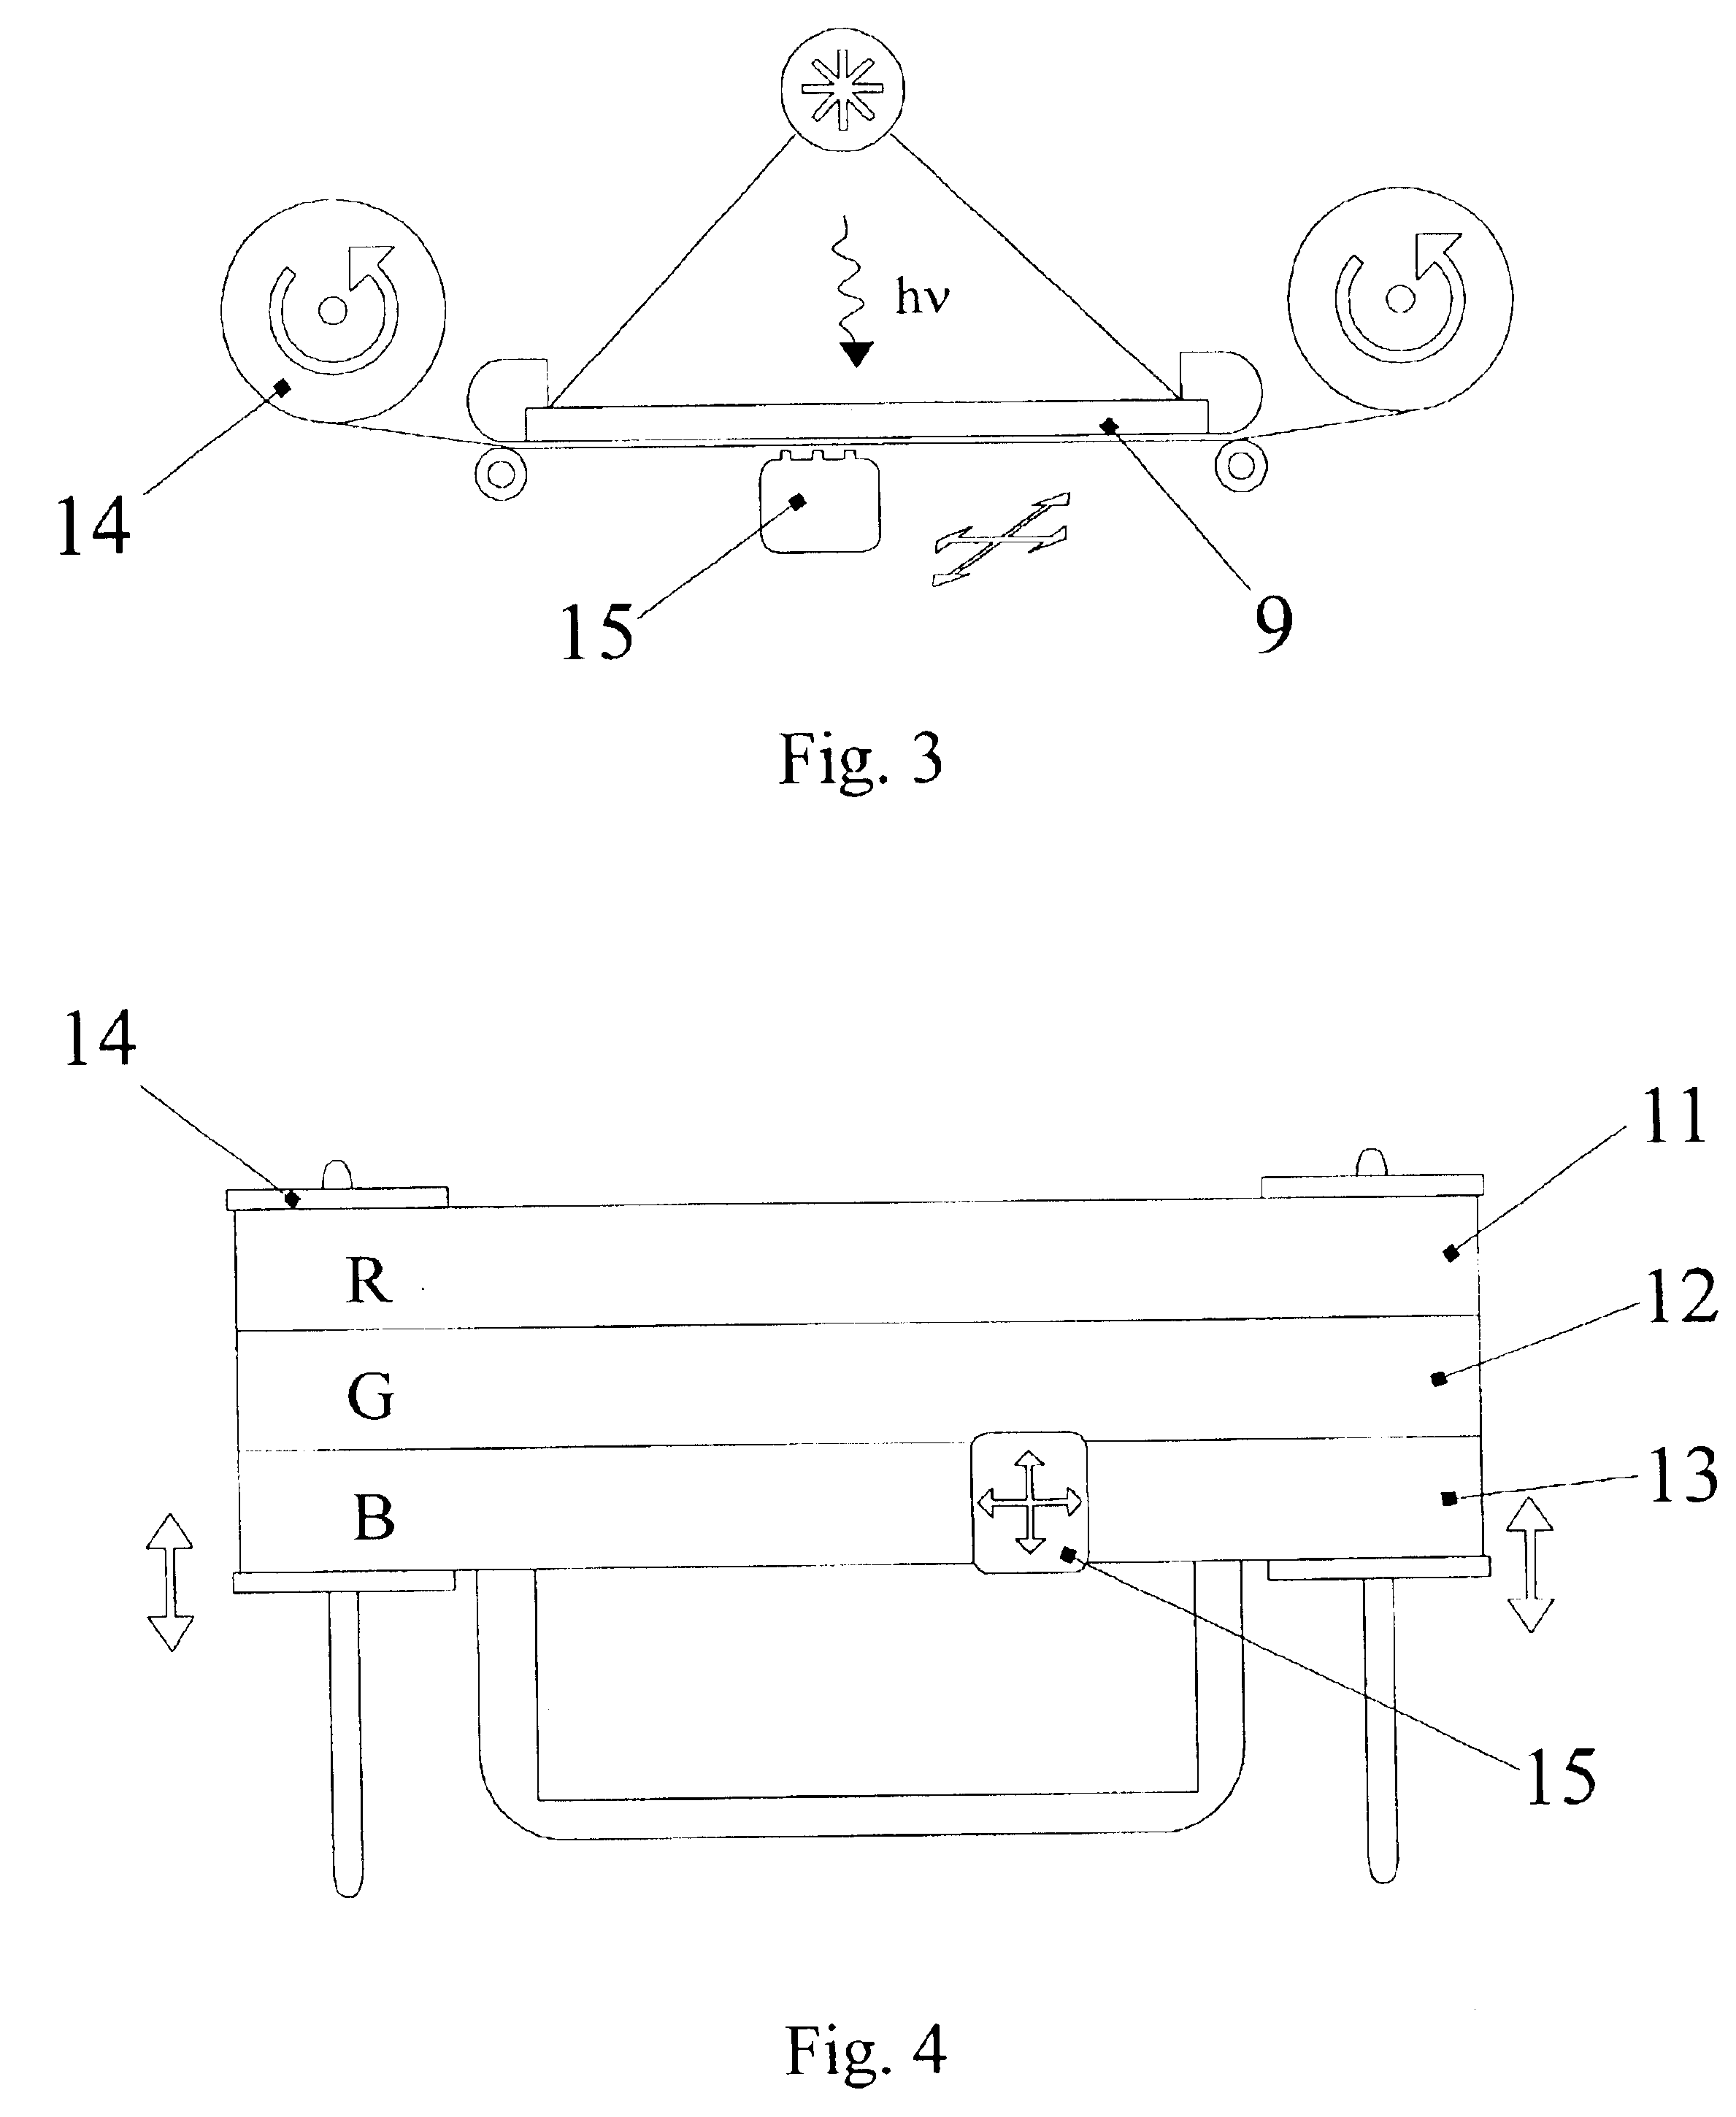 Method of fabricating anisotropic crystal film on a receptor plate via transfer from the donor plate, the donor plate and the method of its fabrication